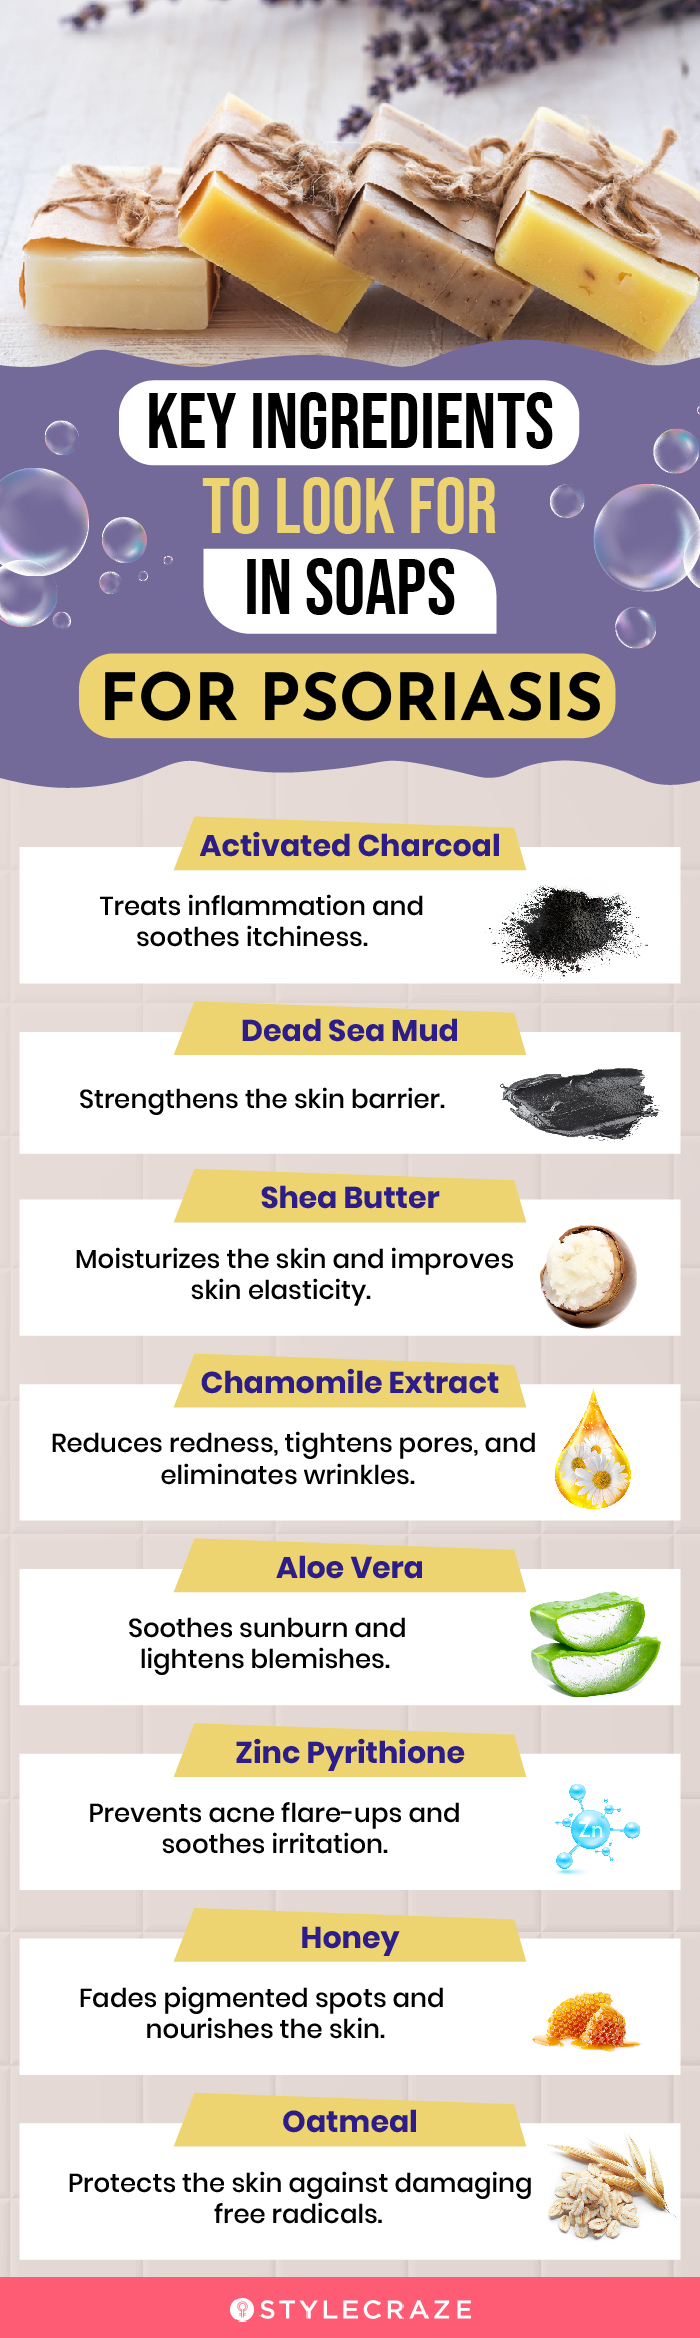 Key Ingredients To Look For In Soaps For Psoriasis (infographic)